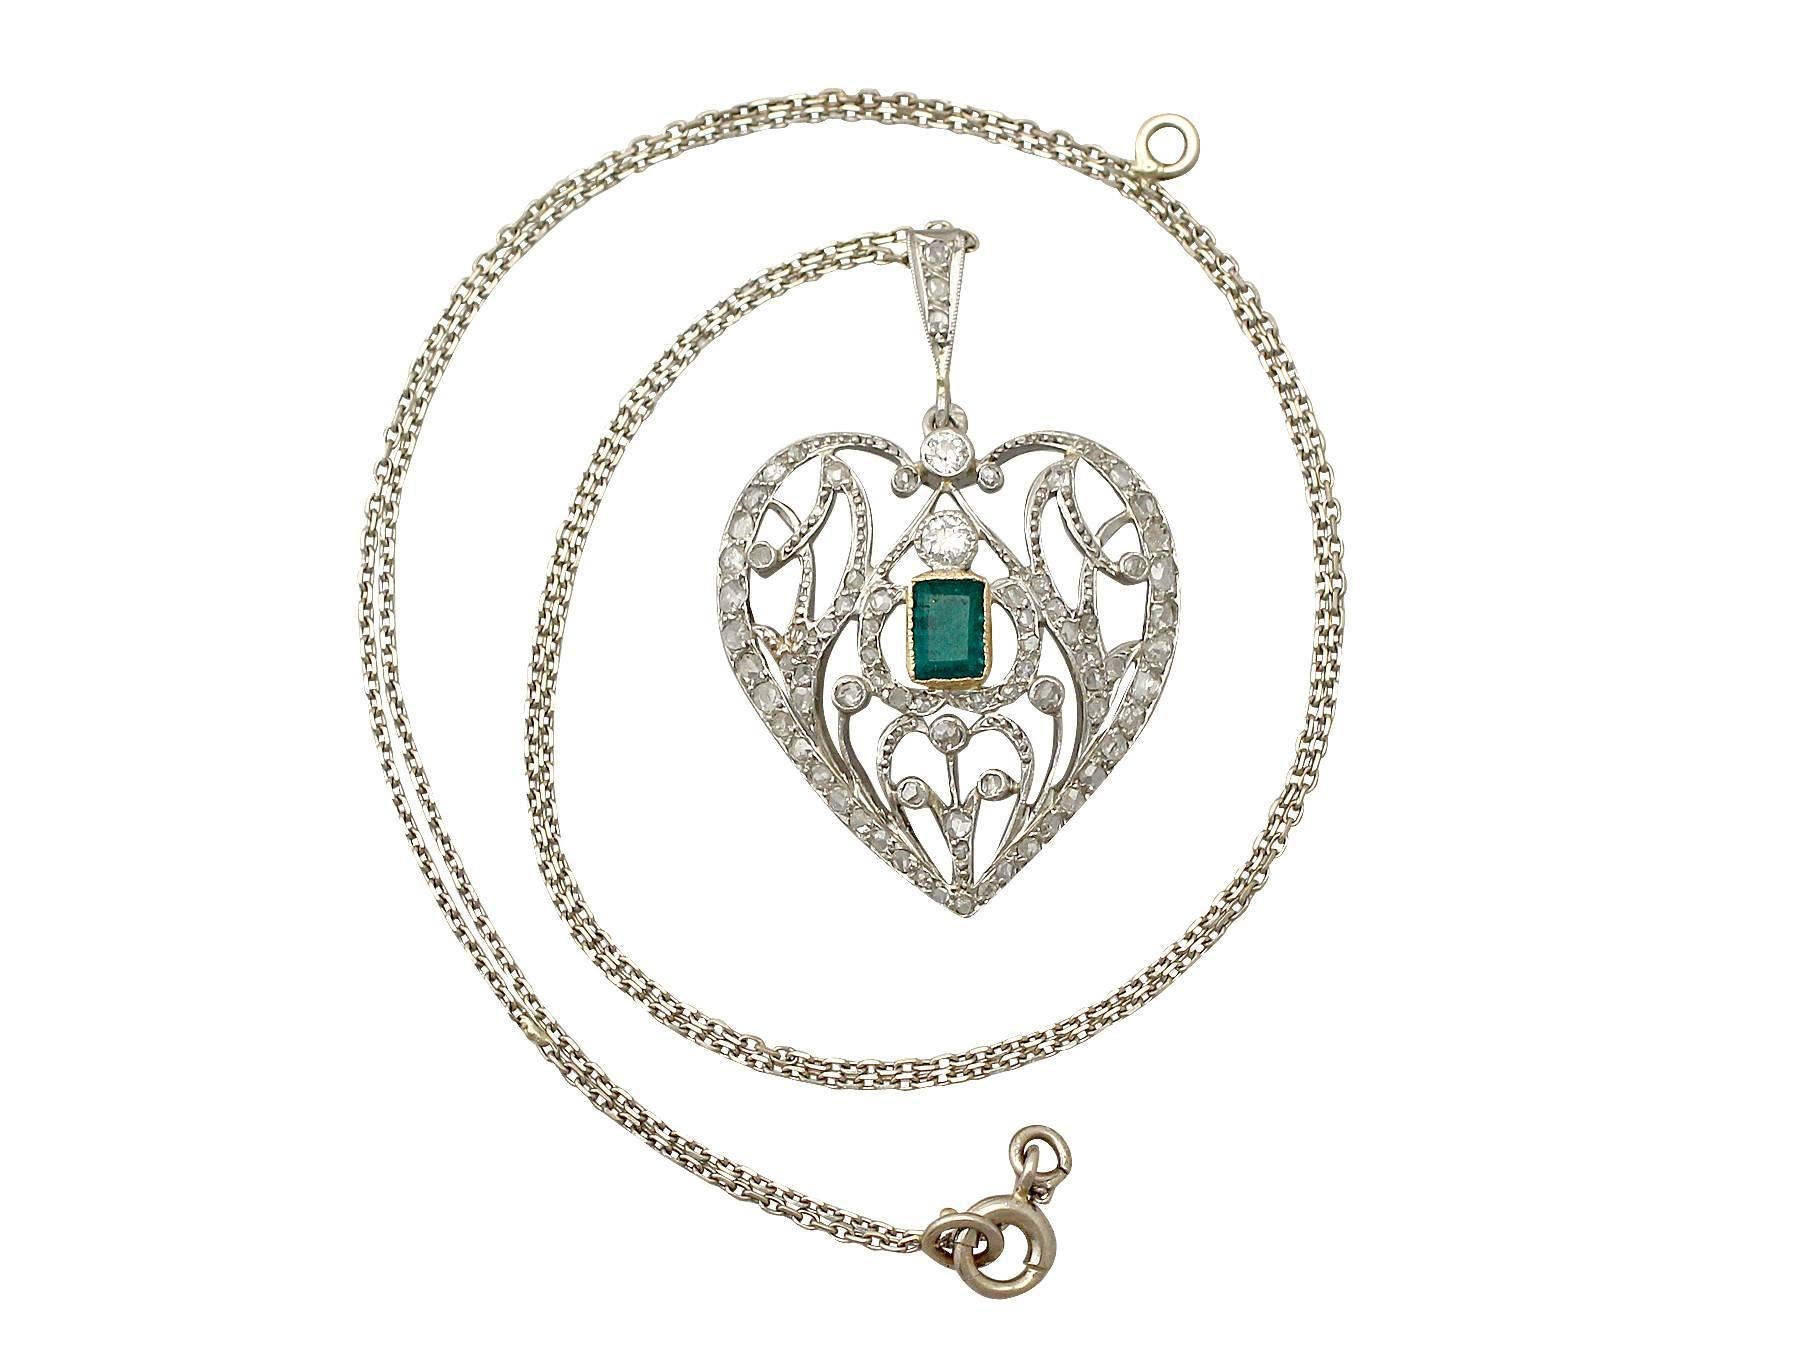 A fine Art Nouveau 0.33 carat emerald and 0.35 carat diamond, 9 karat gold heart shaped pendant; part of our diverse antique jewellery and estate jewelry collections

This fine and impressive diamond and emerald heart pendant has been crafted in 9 k